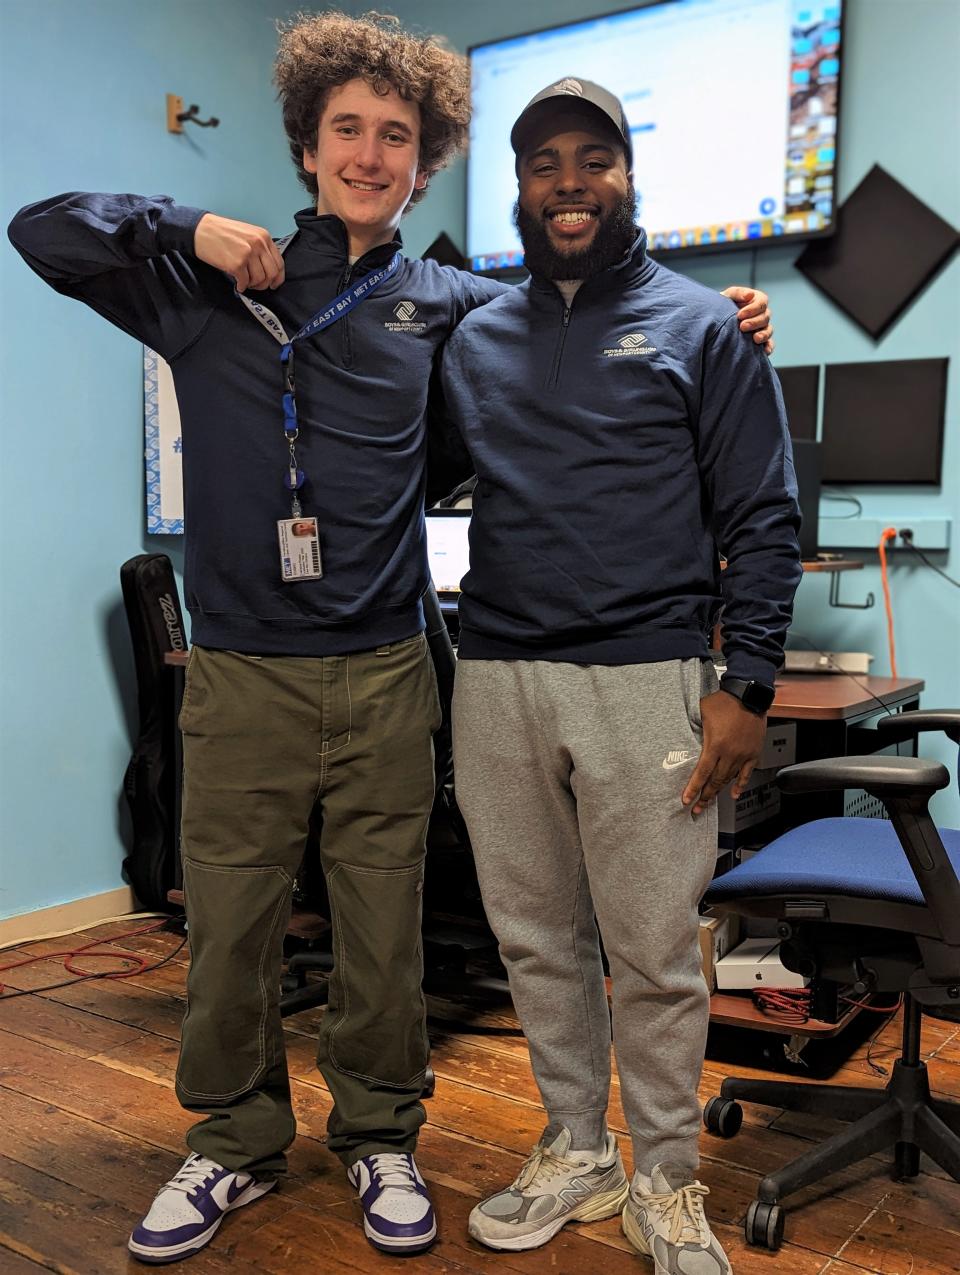 Nate Powers, left, and Marlin DaCruz, a Boys & Girls Club of Newport County director who oversees the Club’s music program,